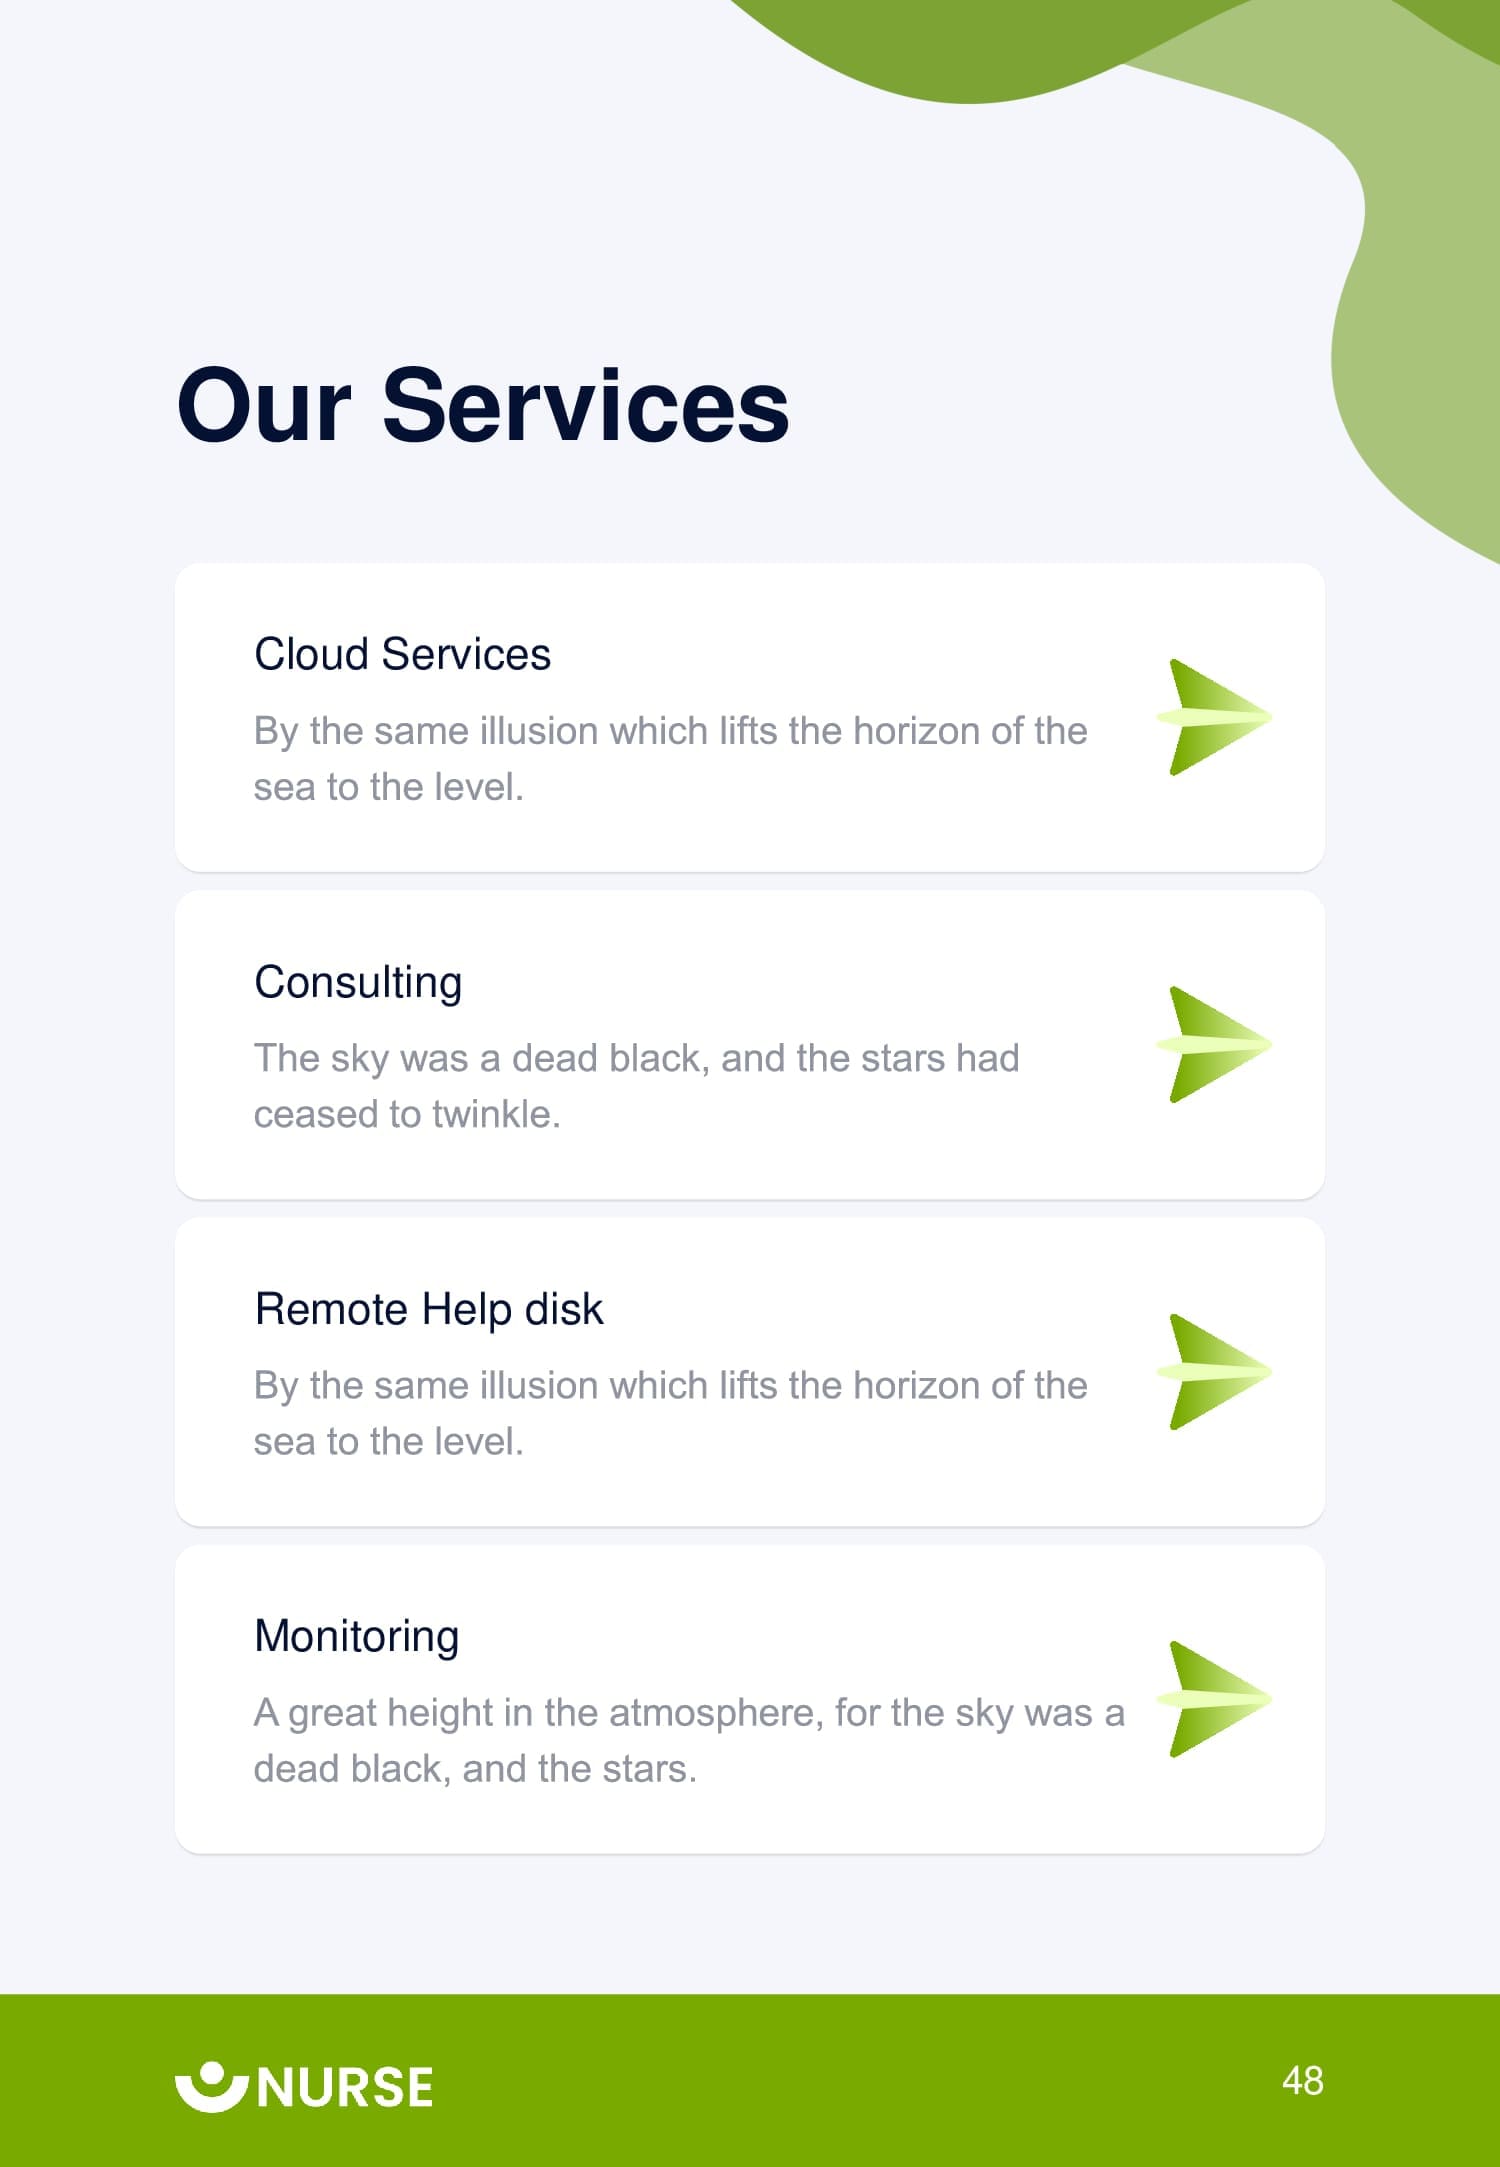 Cloud services, consulting, remote help disk, monitoring.